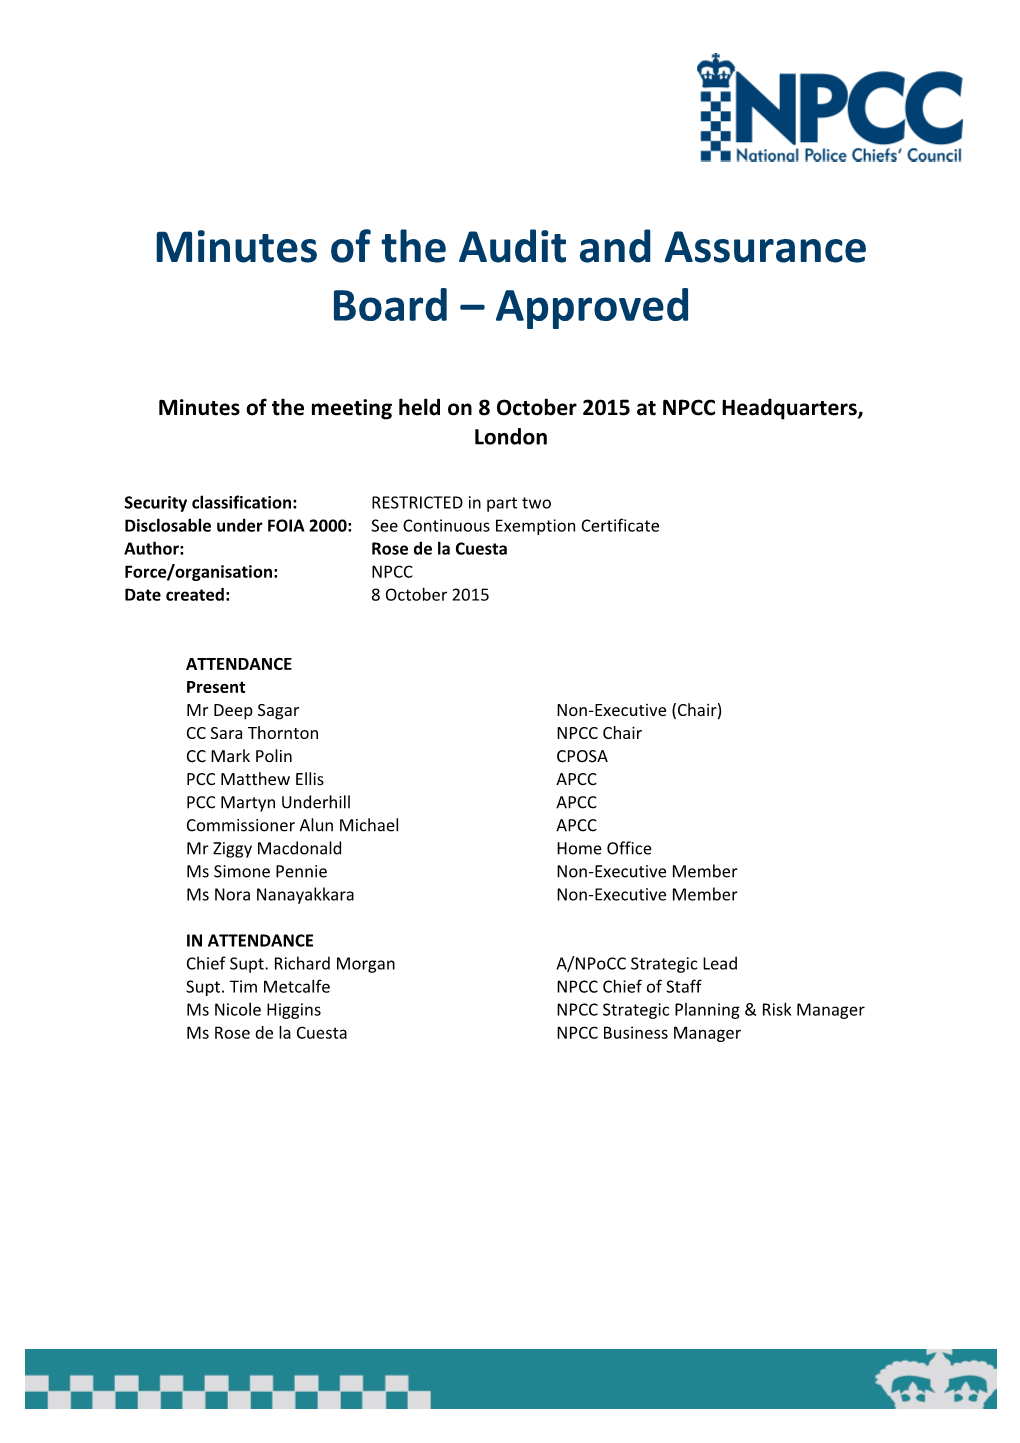 Minutes of the Audit and Assurance Board Approved